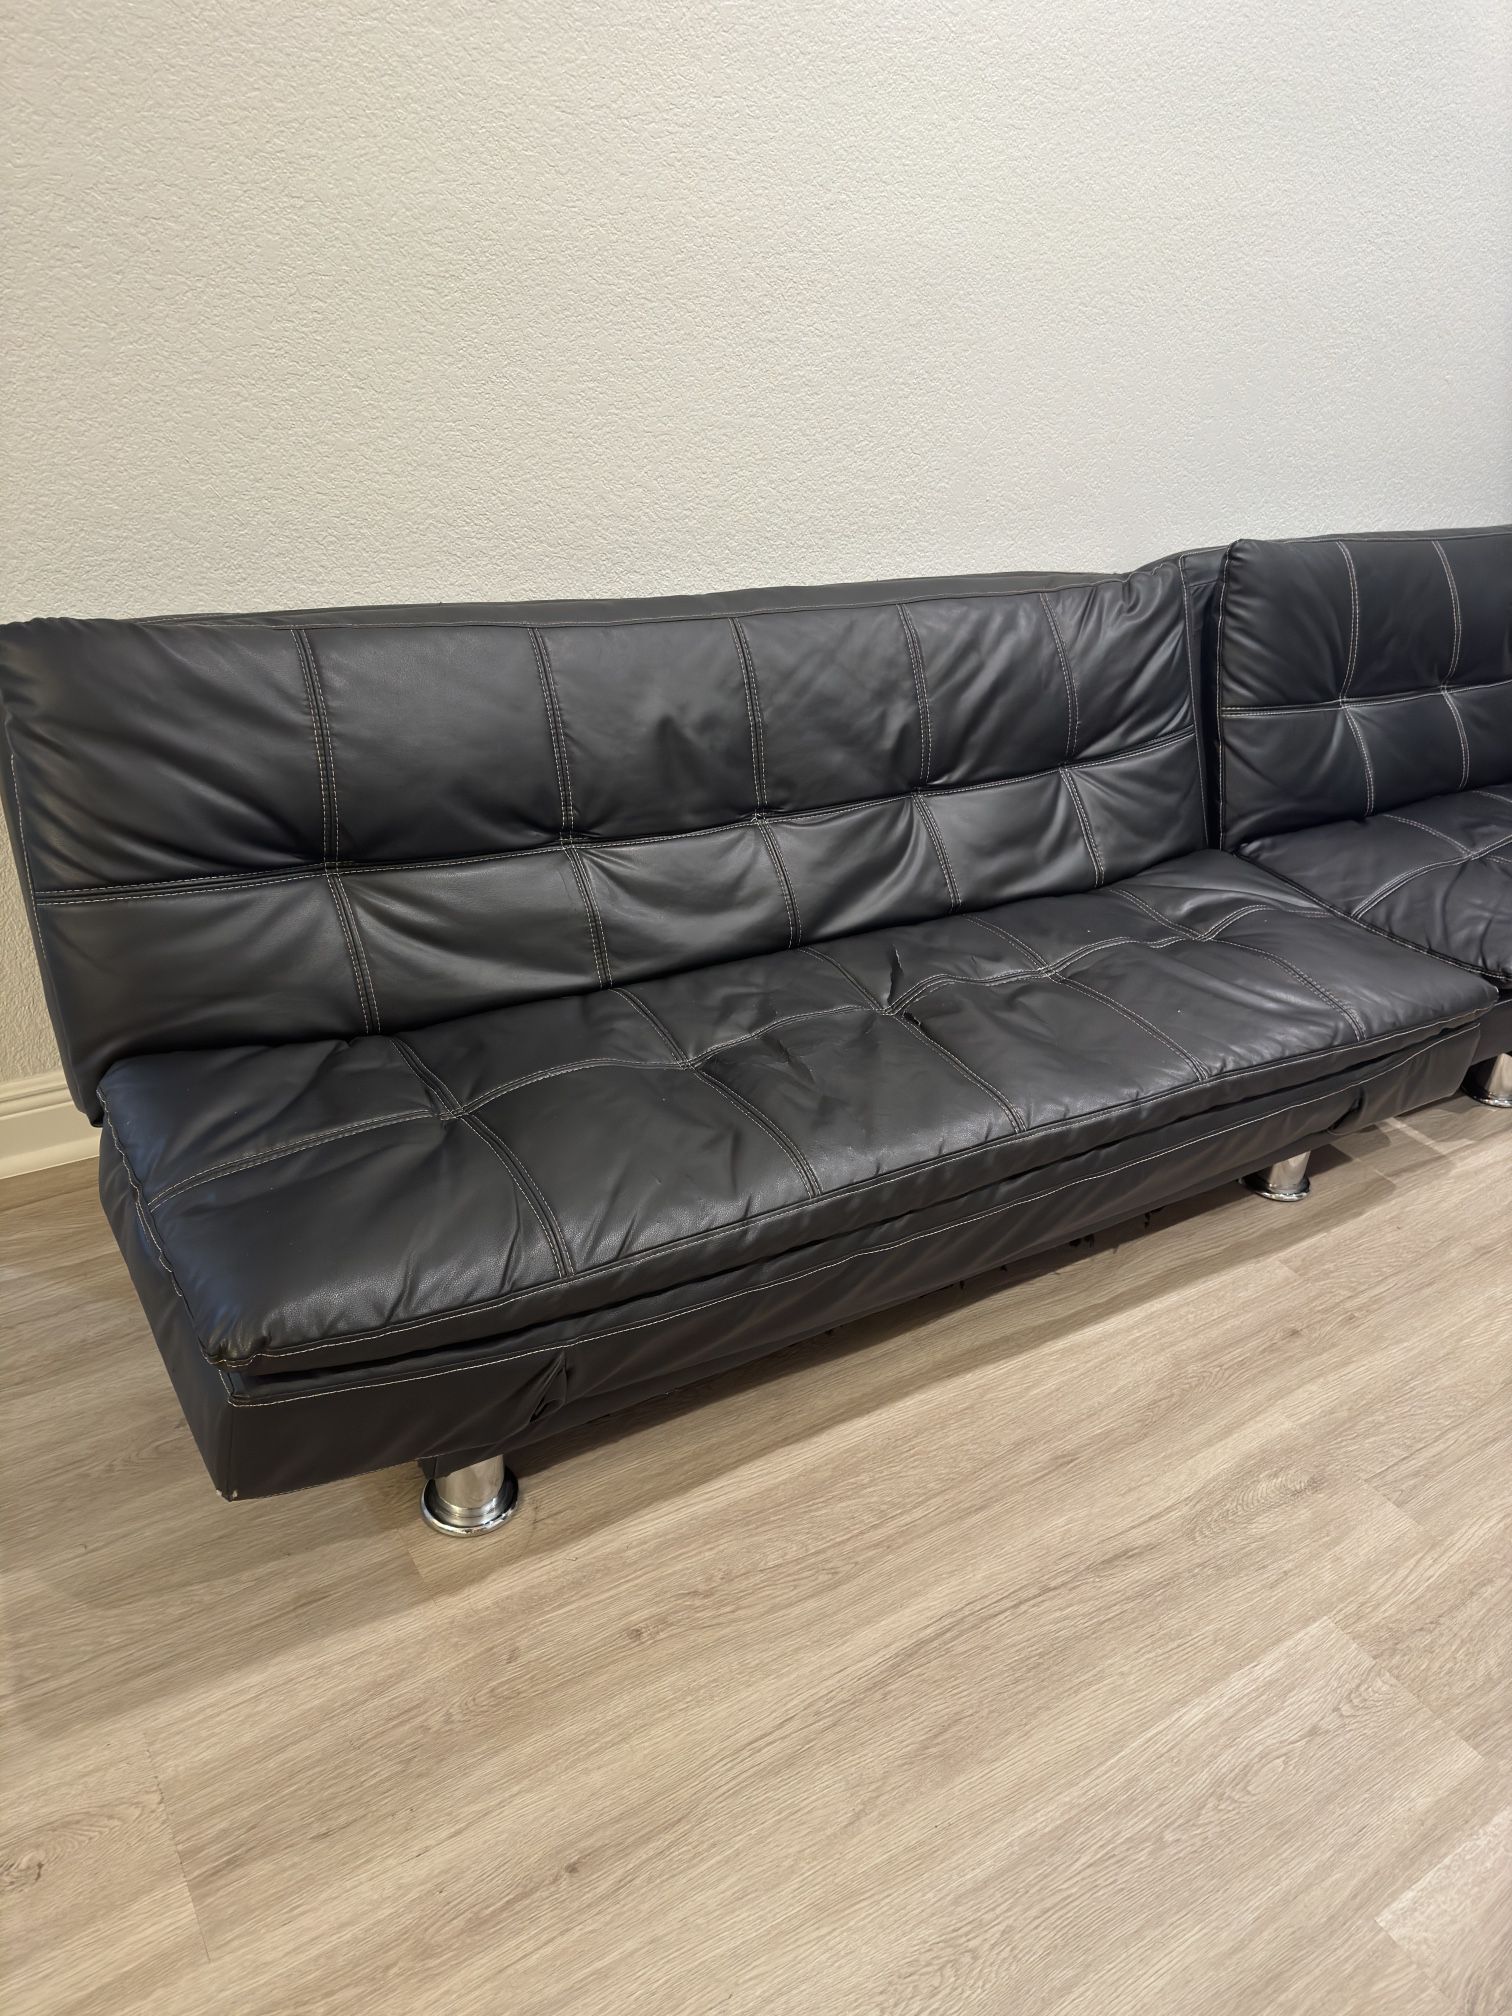 Two black leather Futons